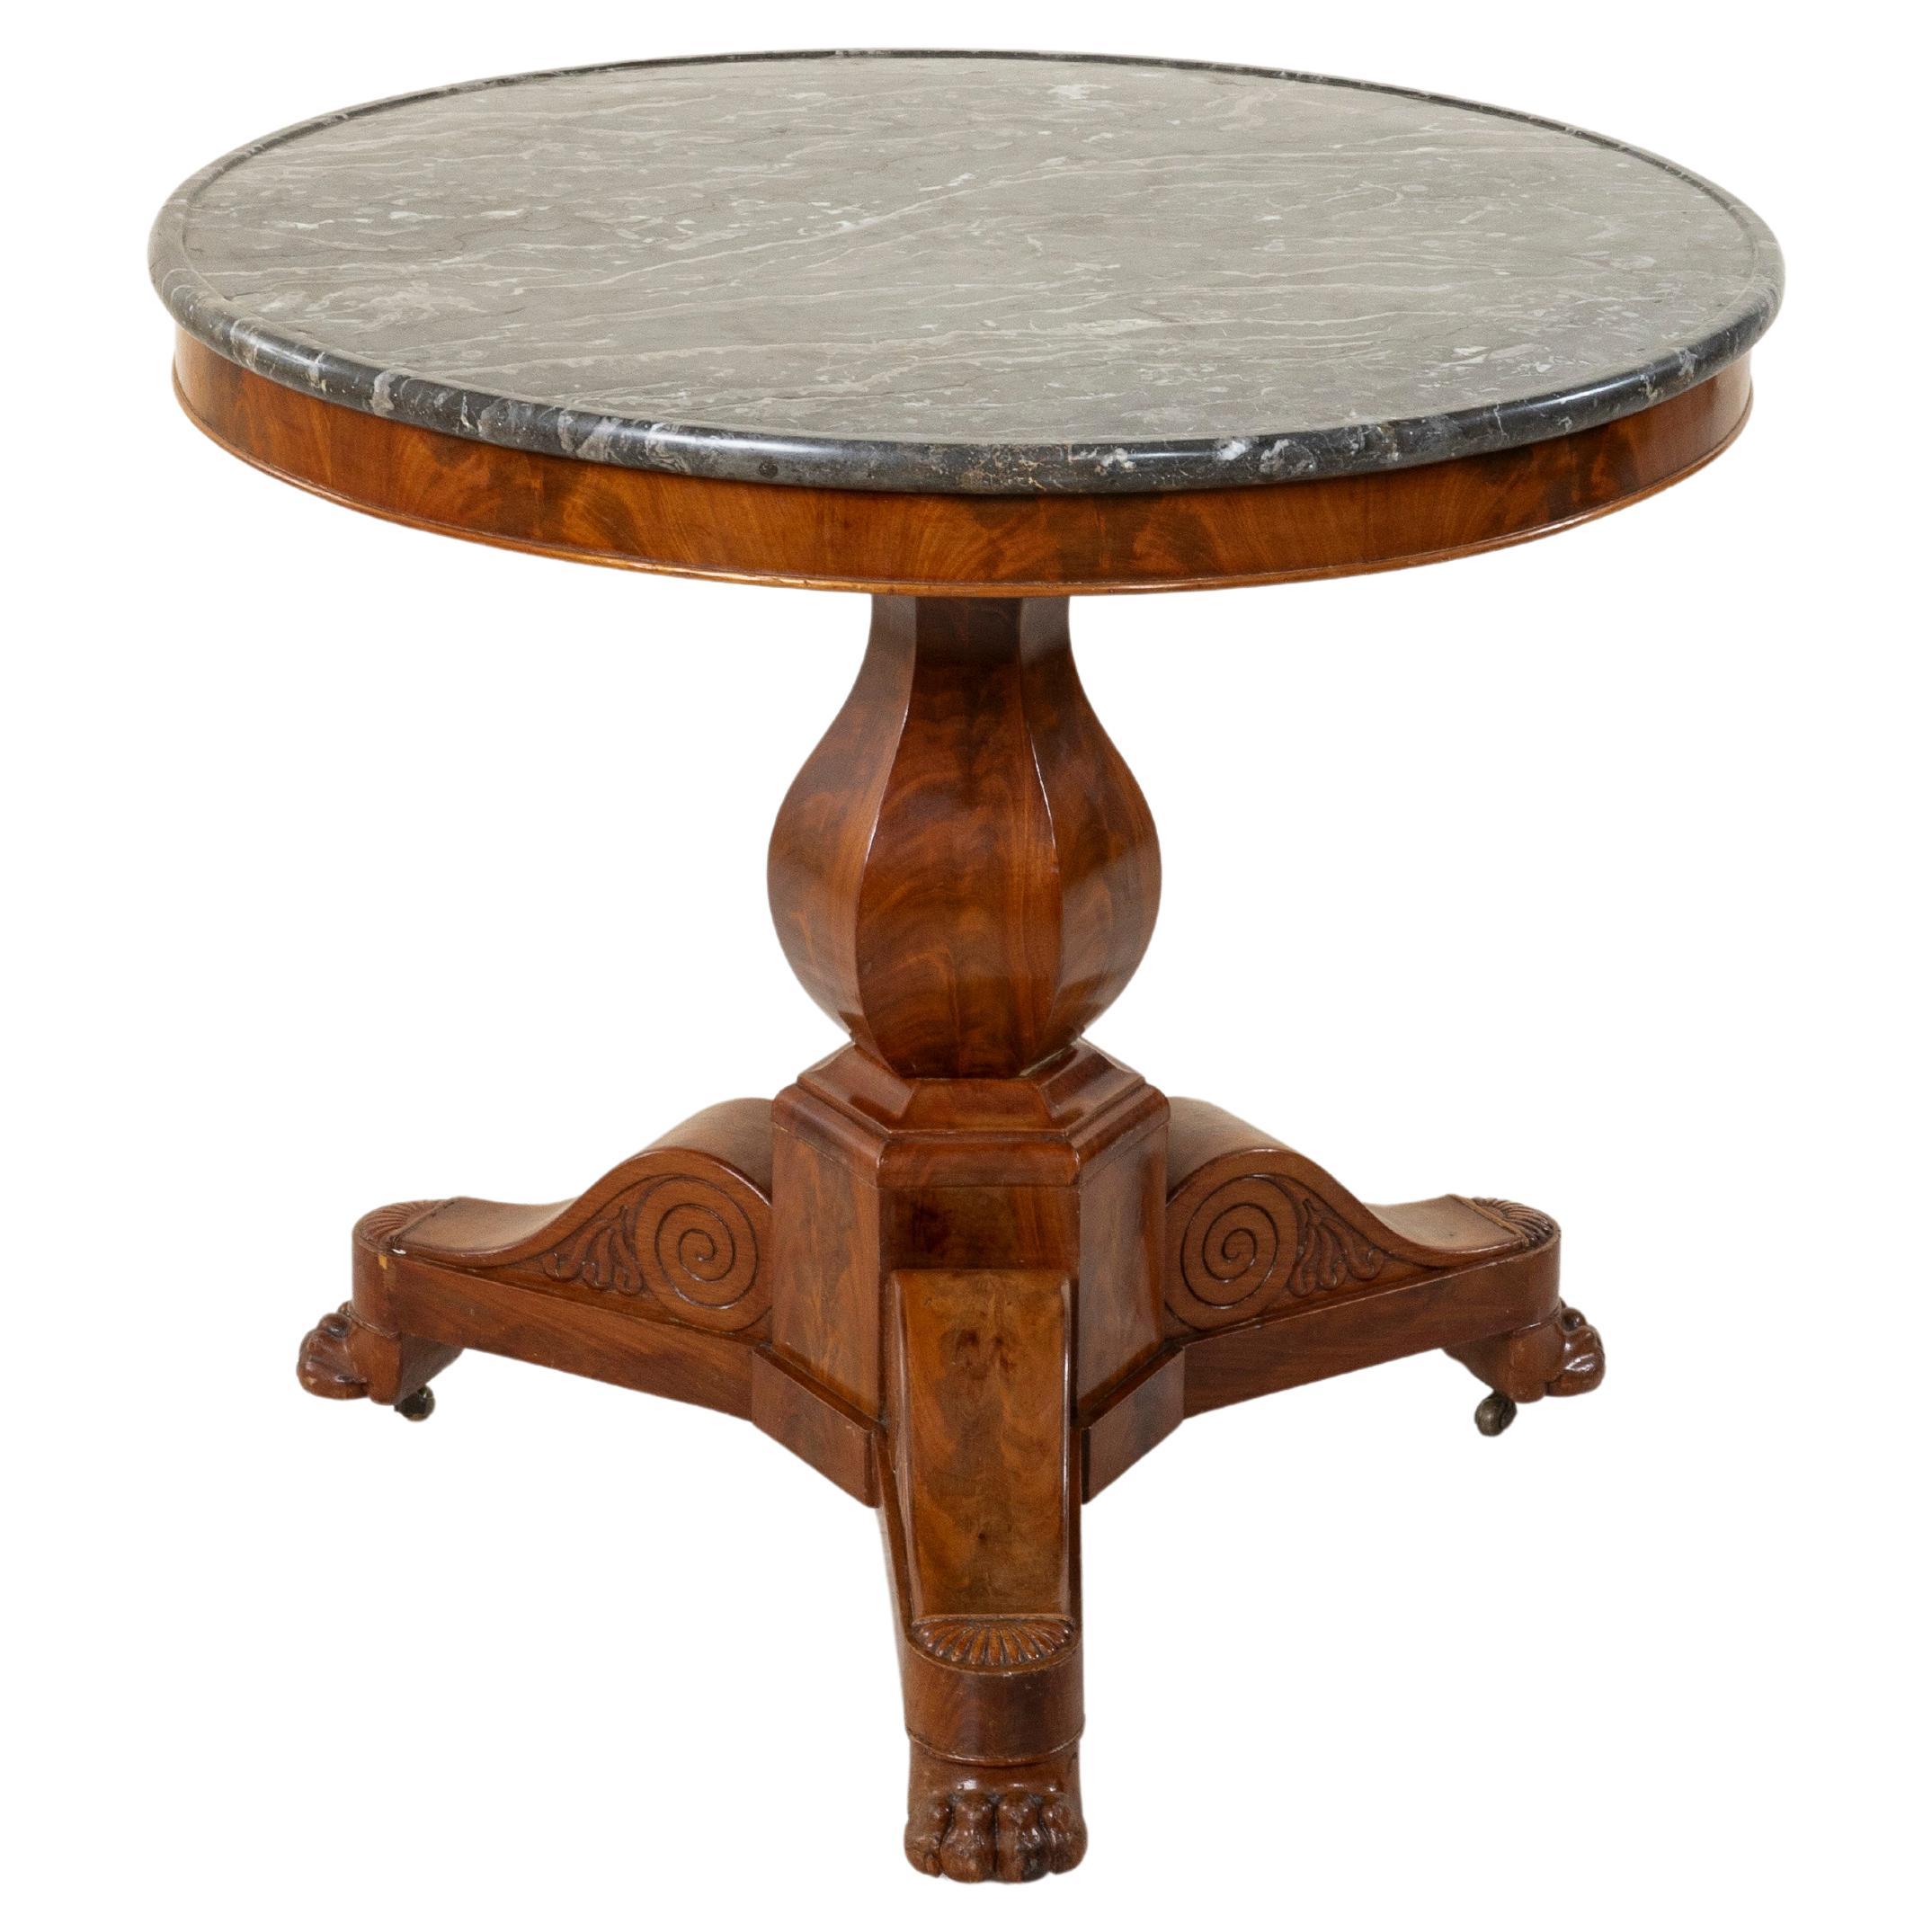 Mid-19th Century French Restauration Period Mahogany and Marble Pedestal Table